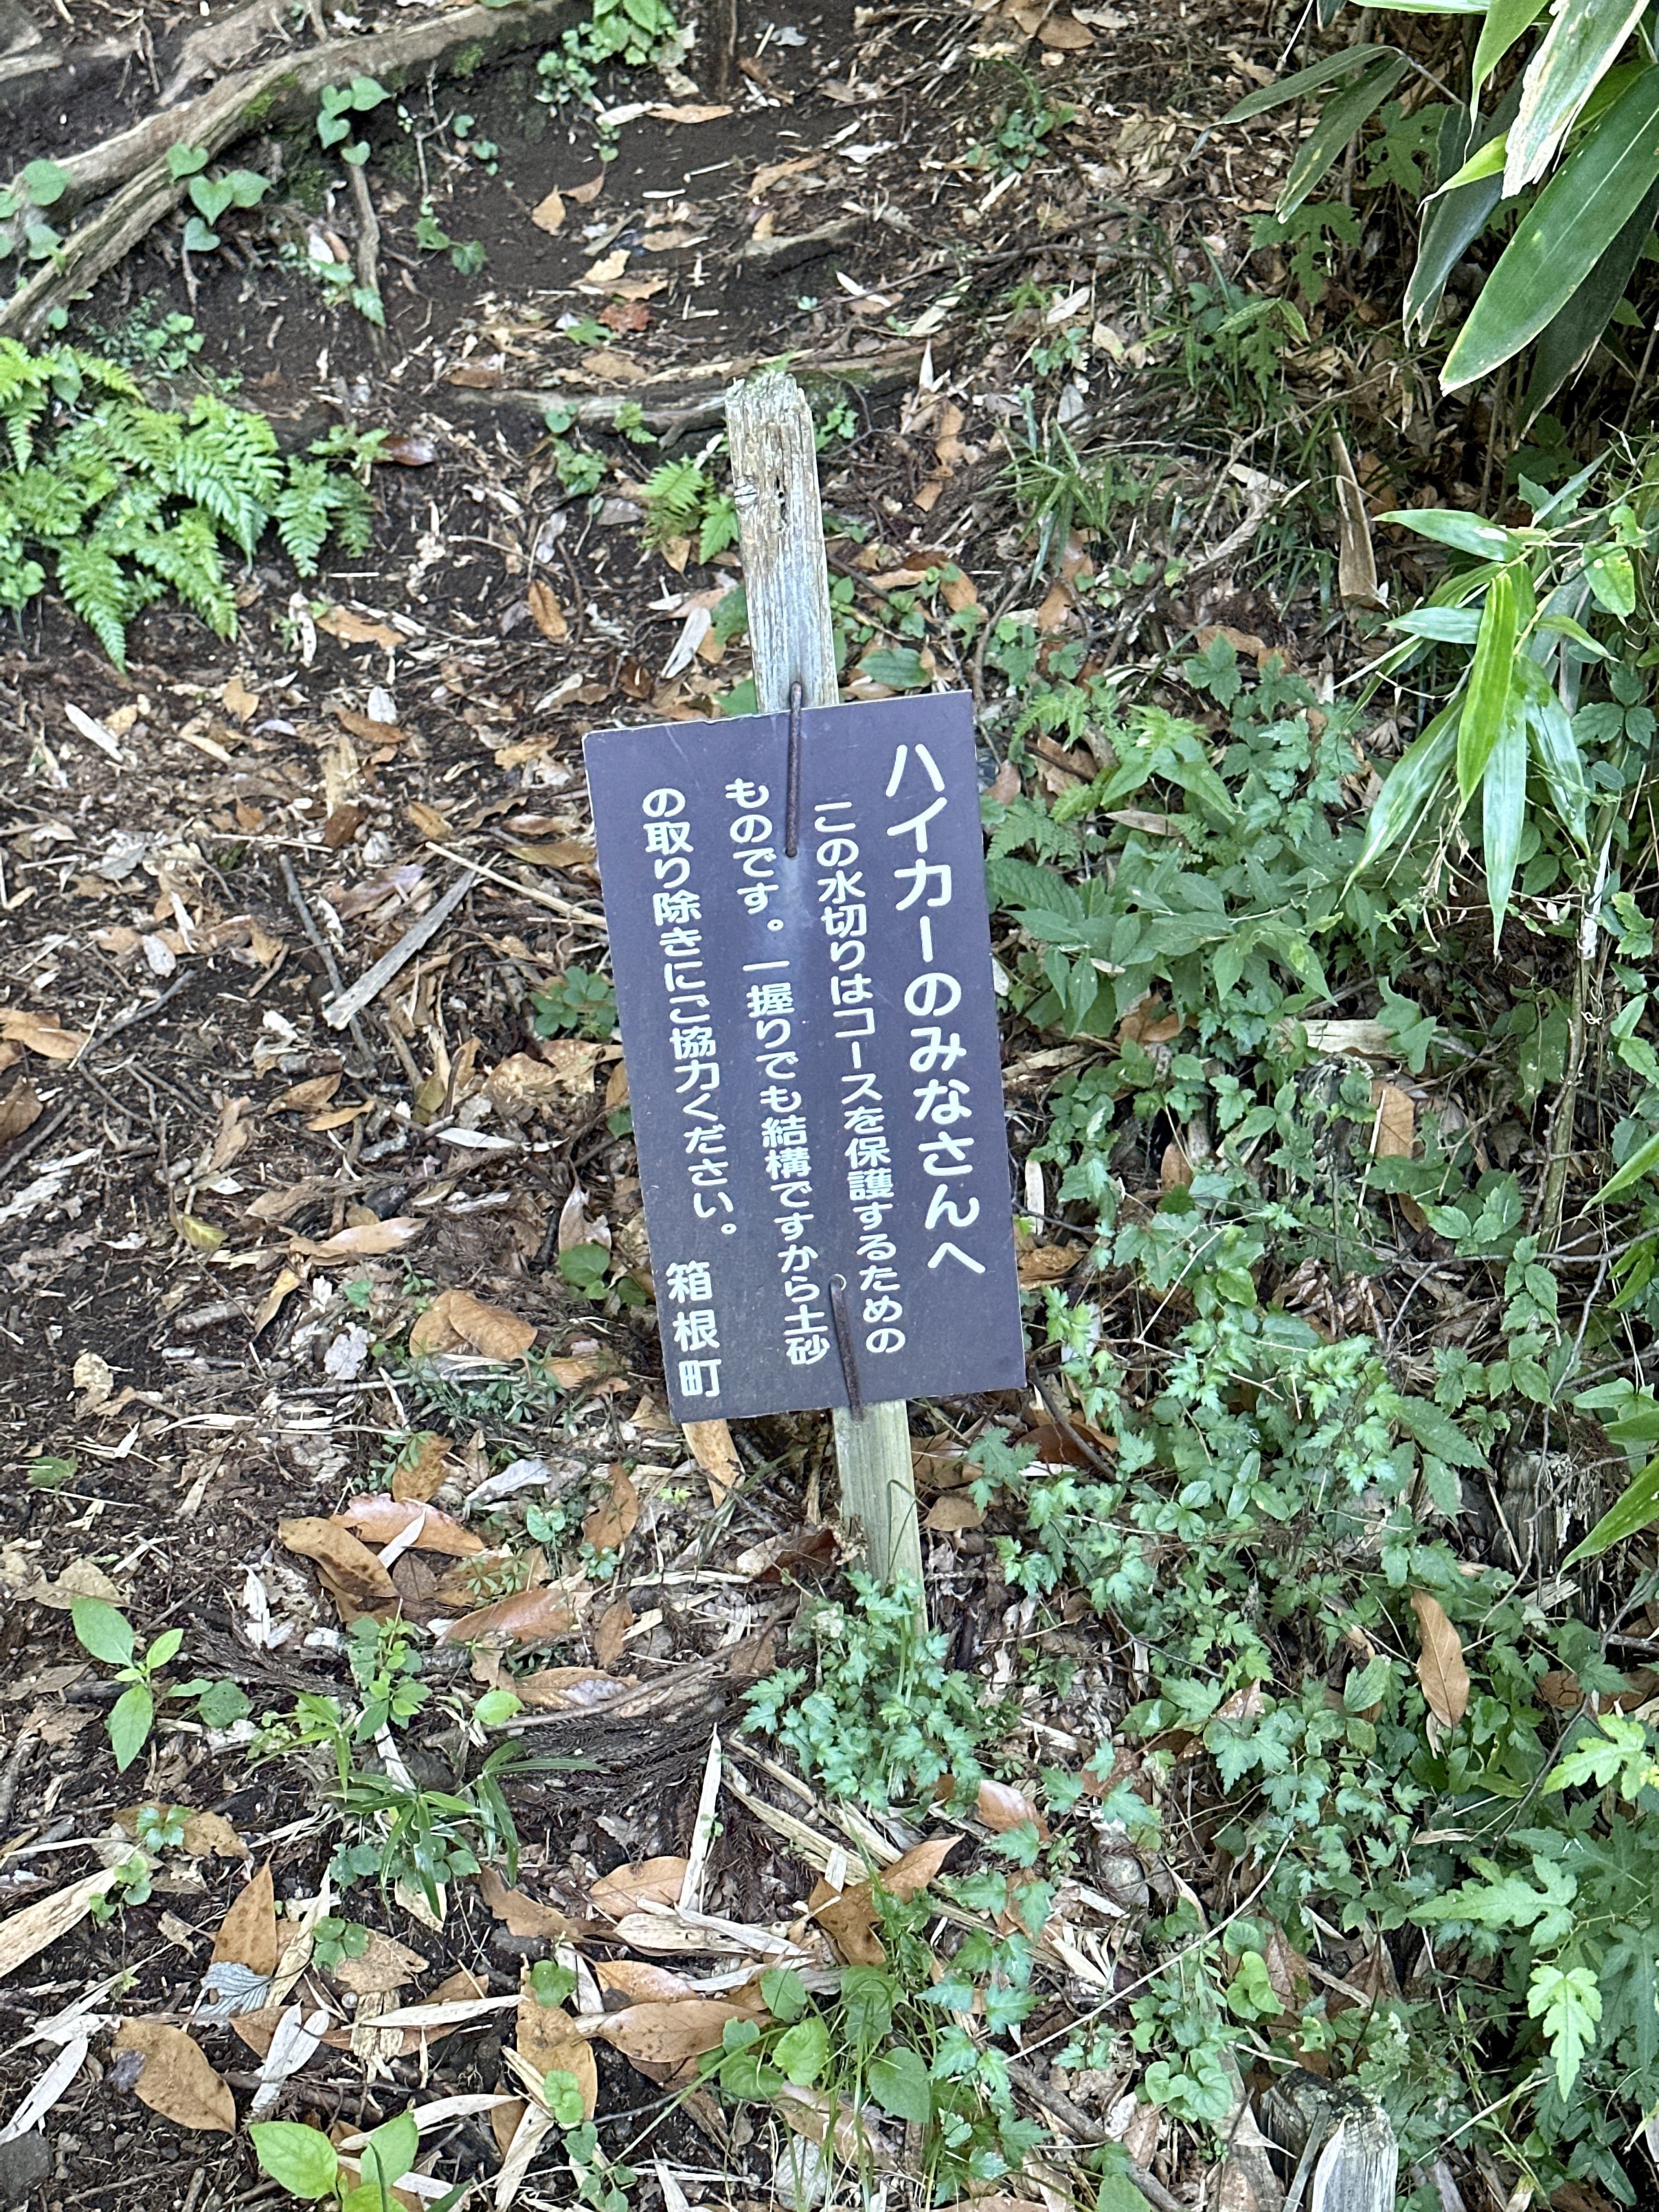 Sign on Hakone hiking trail asking hikers to clear “even one handful” of dirt from the water channels cut across the trail.